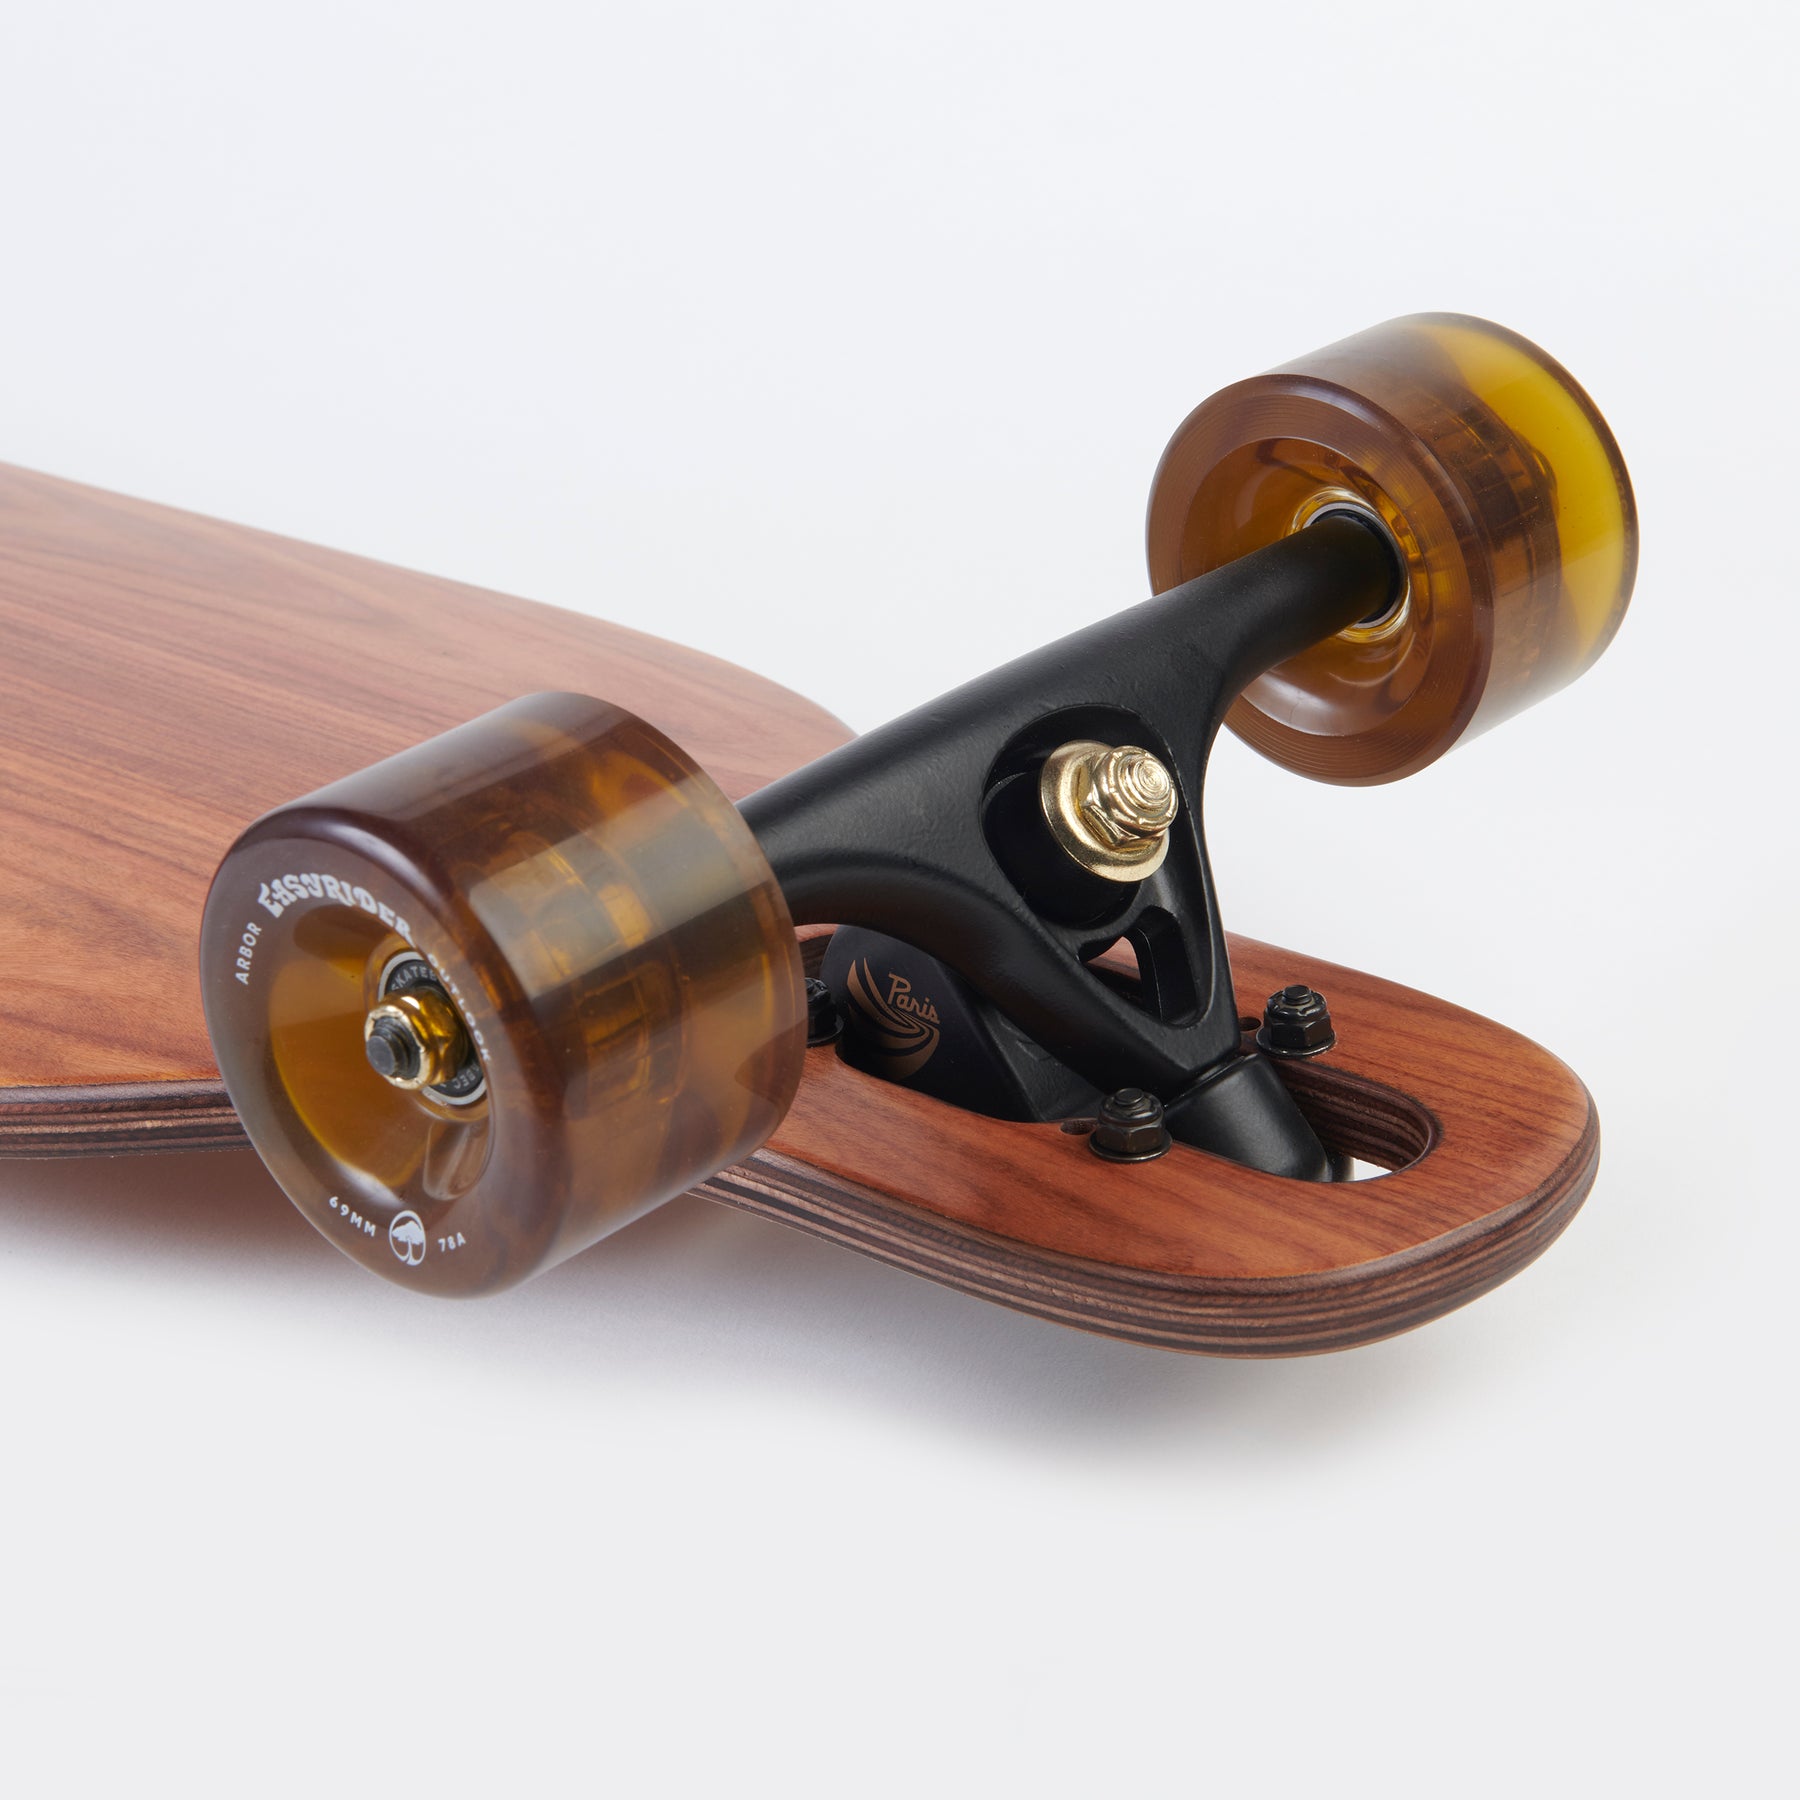 Arbor Axis 37 Flagship Longboard Complete